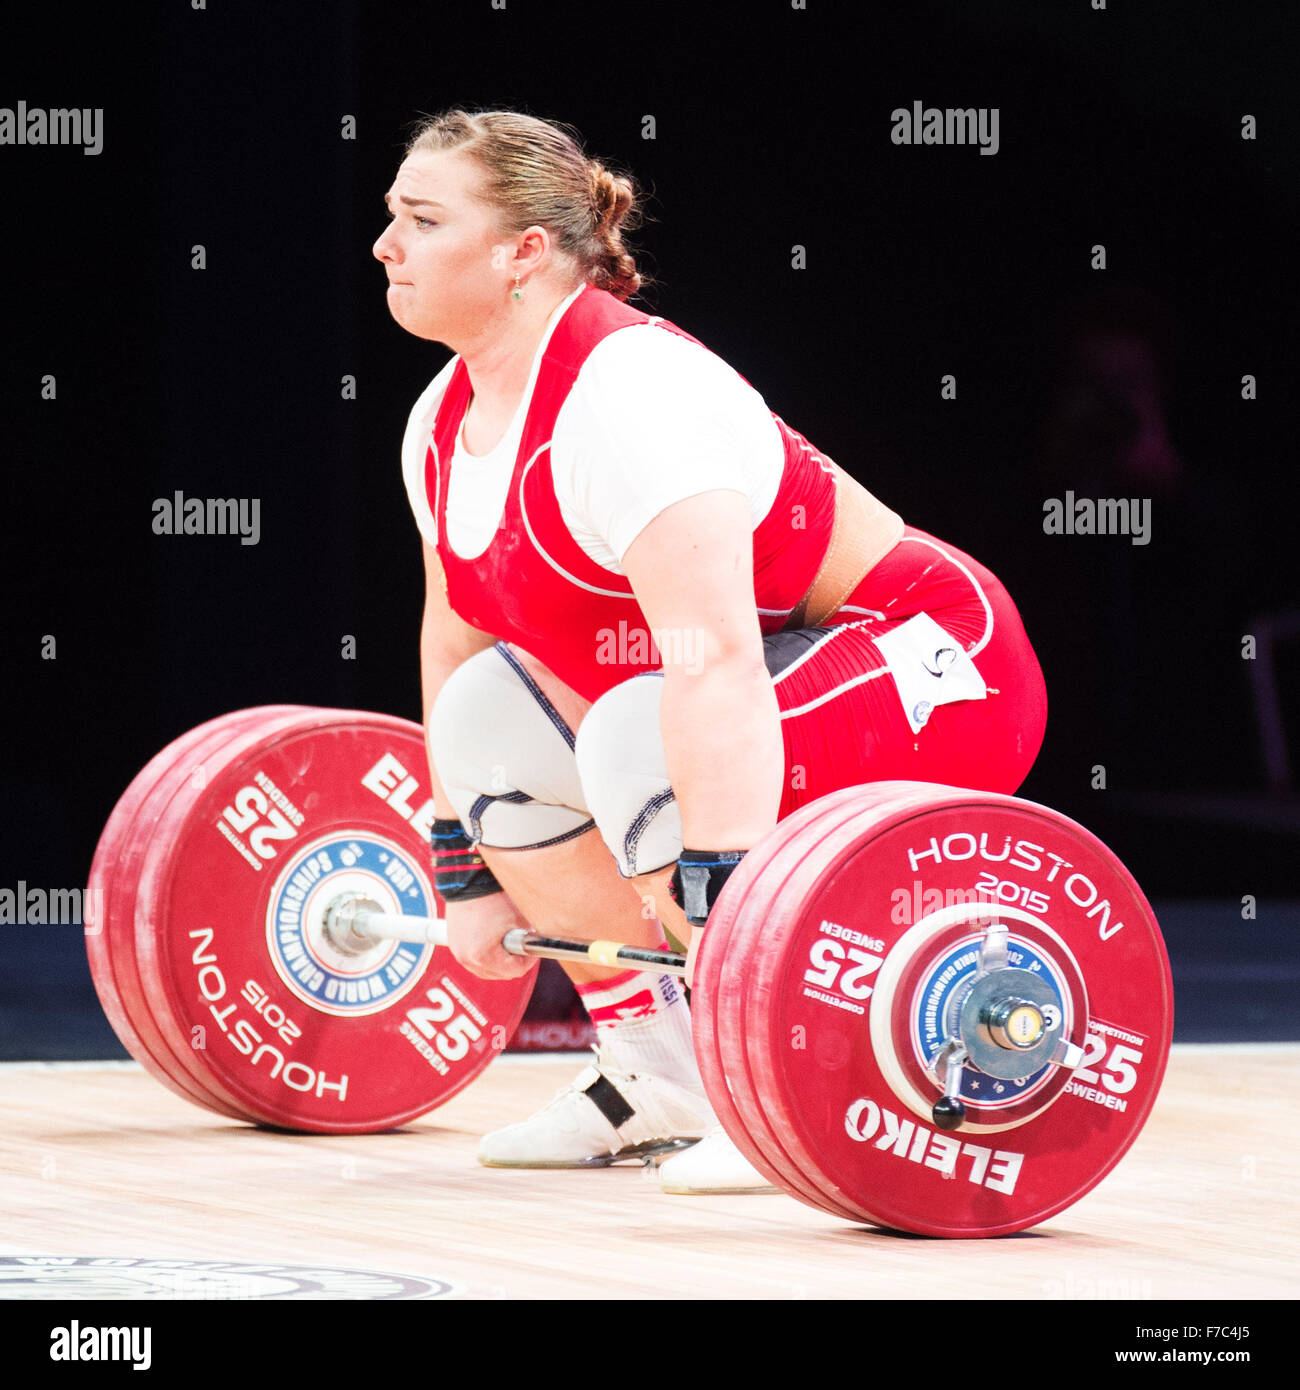 November 26, 2015: Tatiana Kashirina wins the gold medal in the clean and jerk and total in the Women's 75+ Class at the World Weightlfting Championships in Houston, Texas. Brent Clark/Alamy Live News Stock Photo